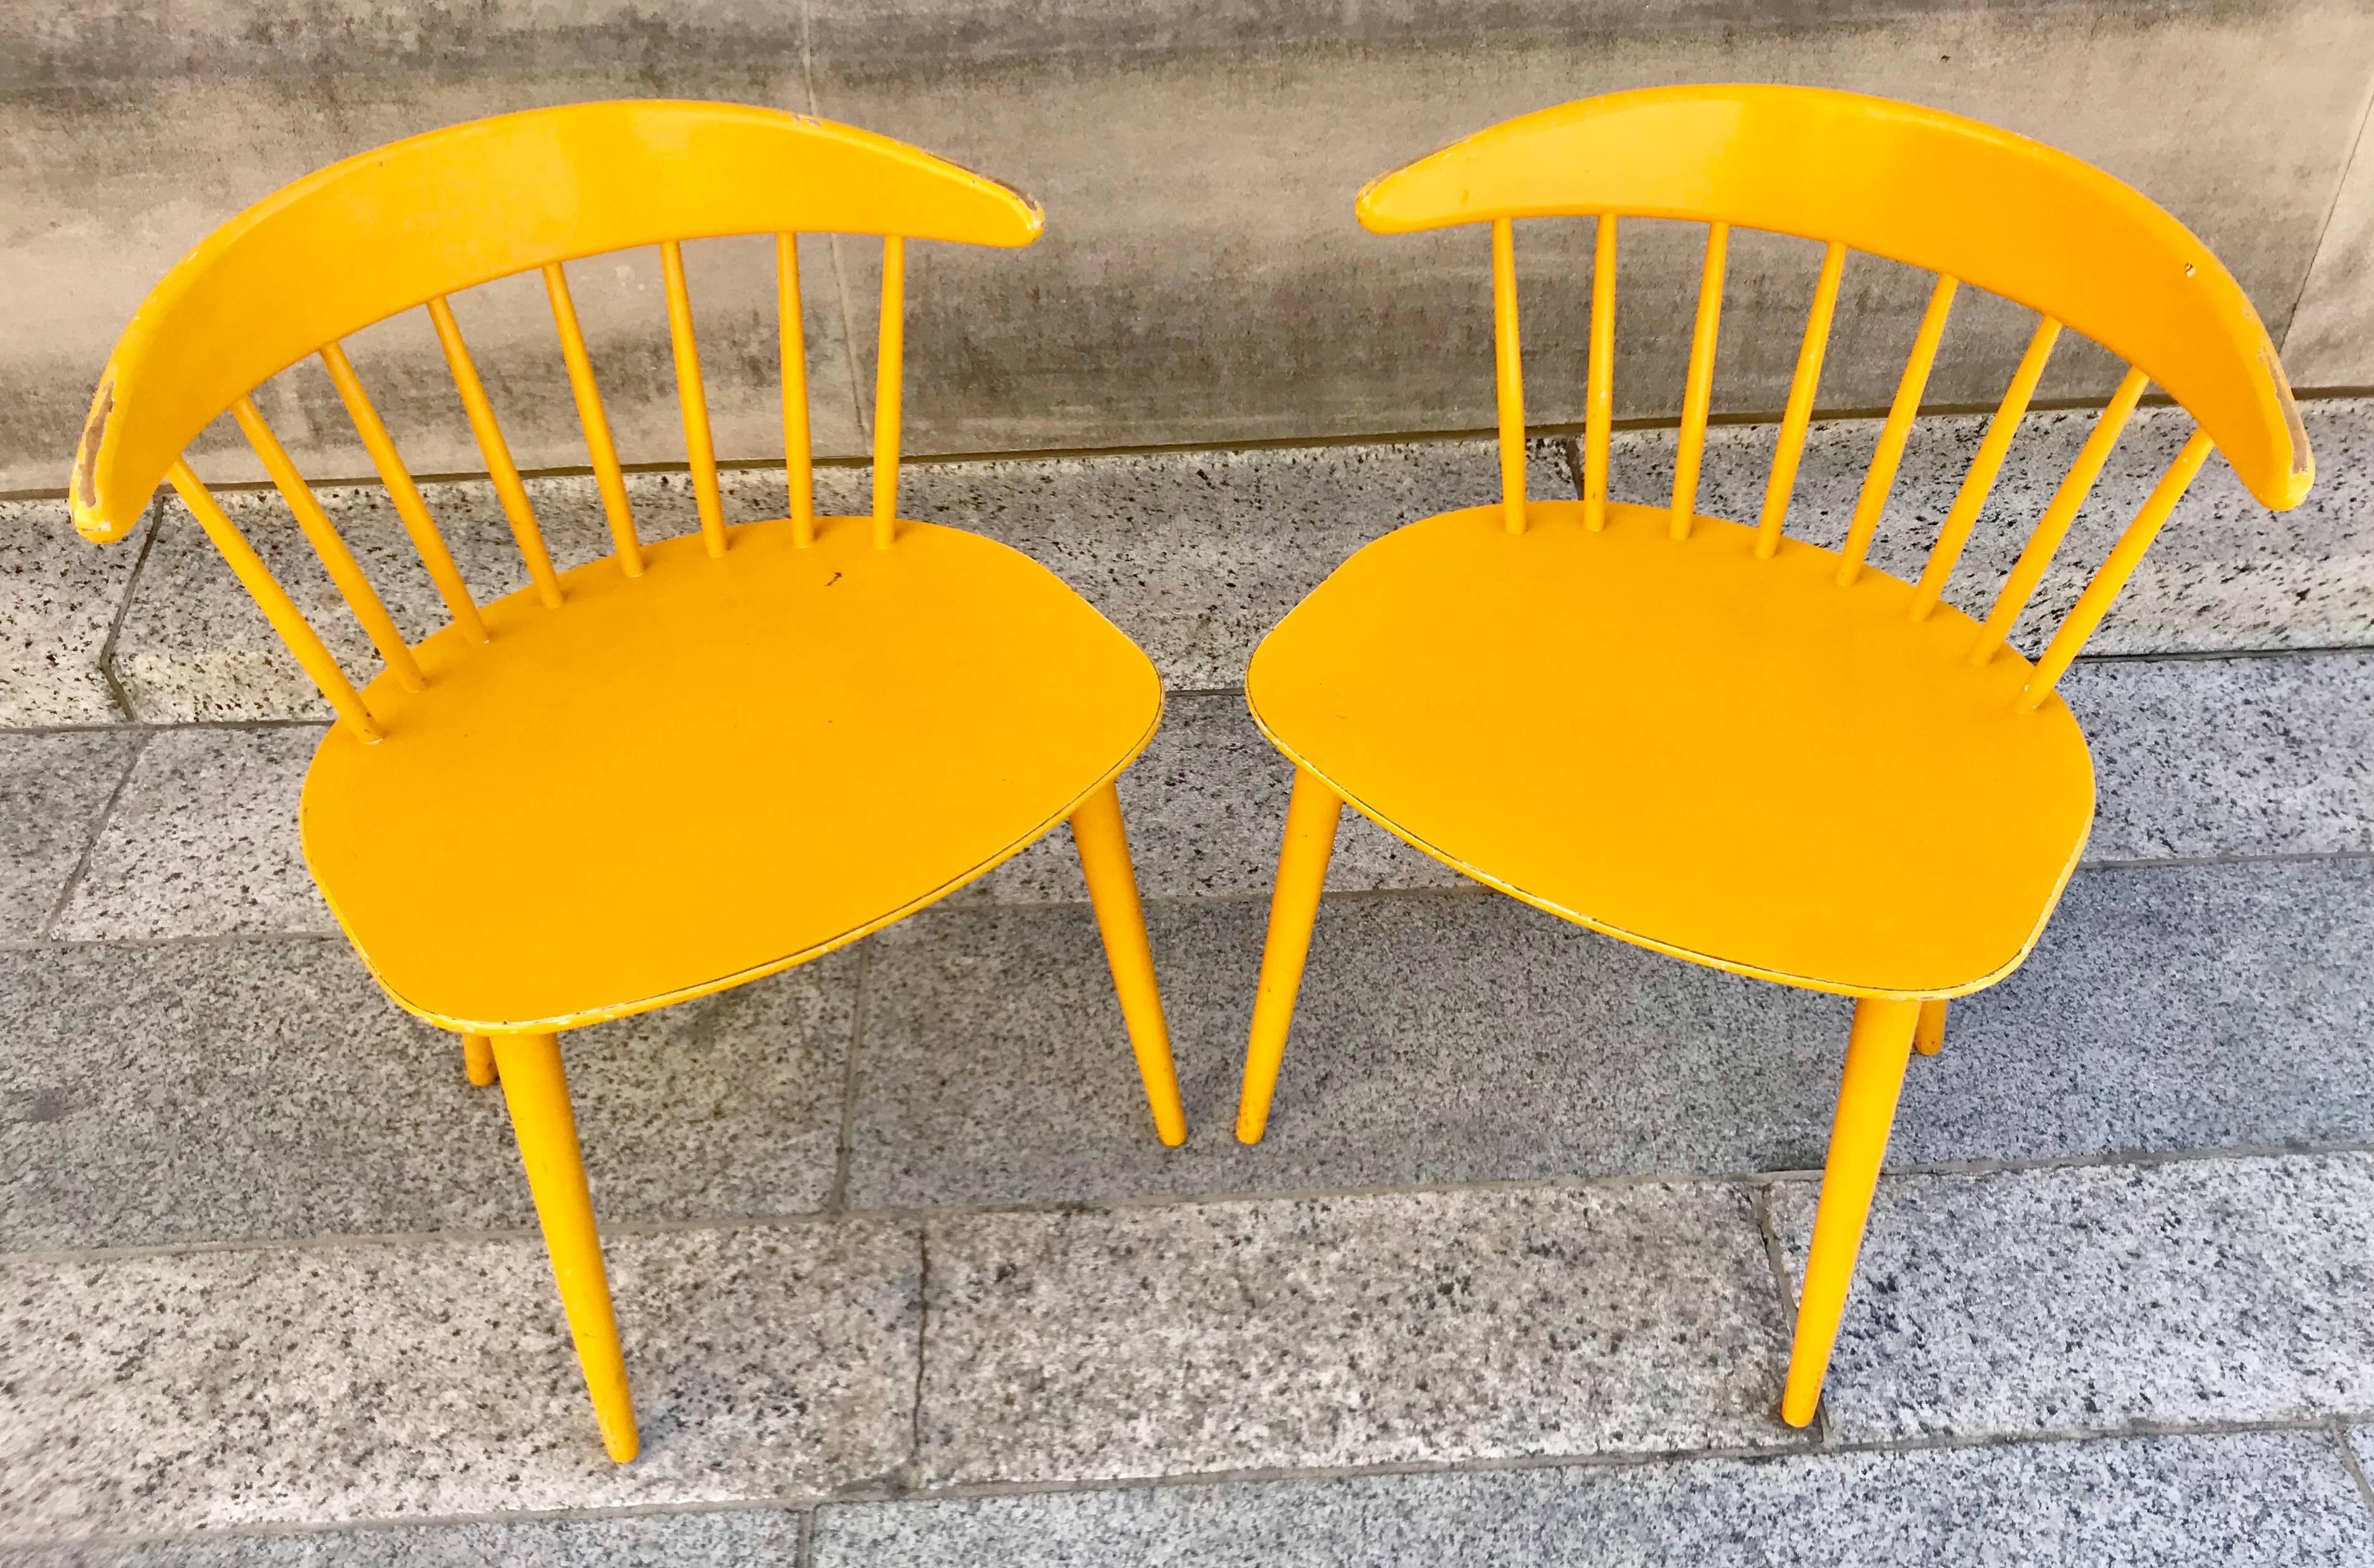 Fabulous pair of Danish modern painted birch side chairs from designed by Evjind Johansson for FDB Mobler.  These chairs were originally designed in the 1950s, and these chairs were produced in 1971. Stamped and dated on underside of seat. Great